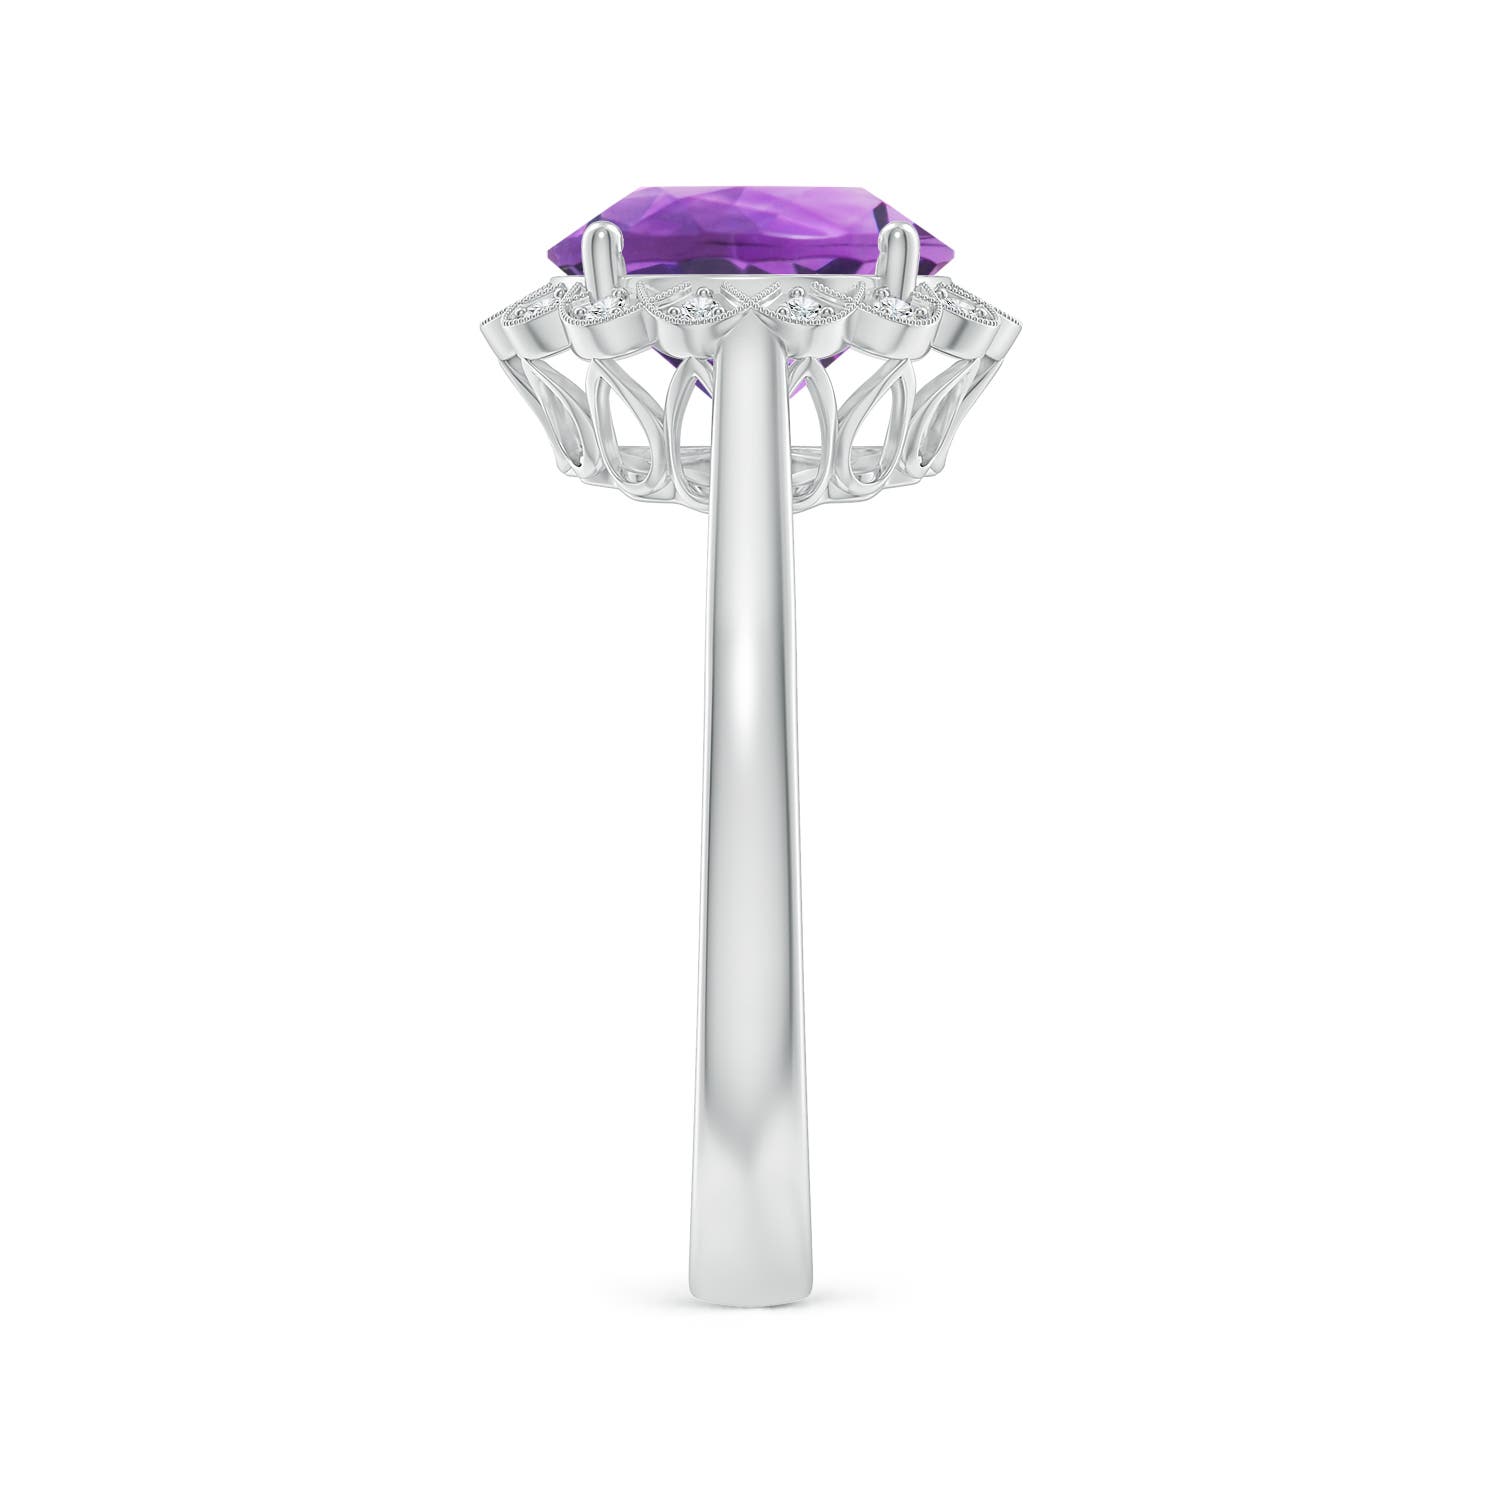 AA - Amethyst / 2.52 CT / 14 KT White Gold